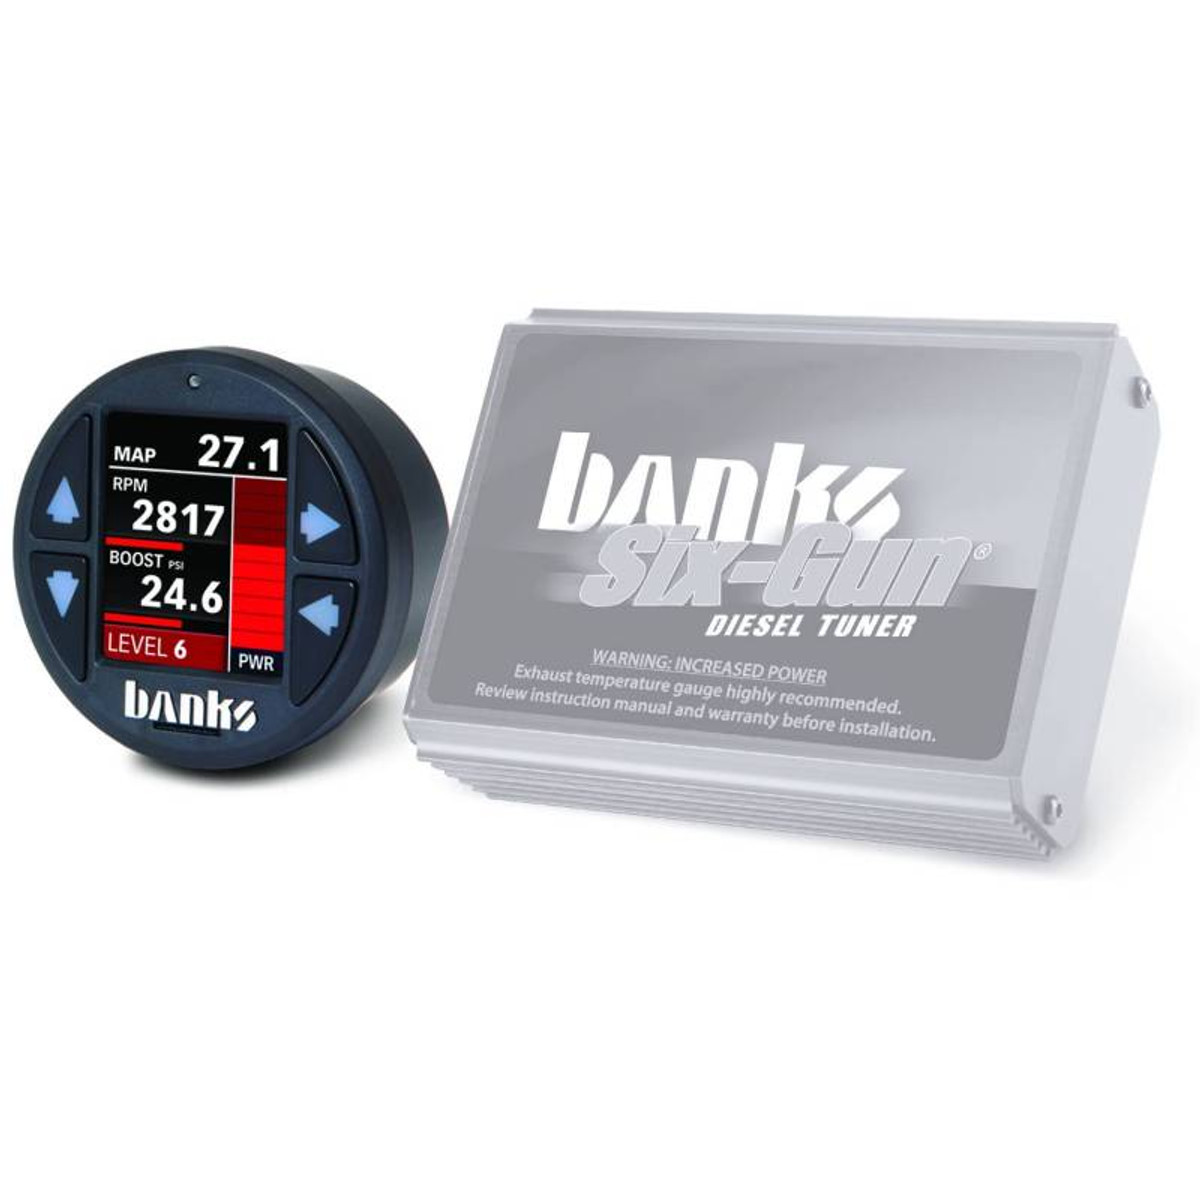 Banks - Six-Gun Diesel Tuner with Banks iDash 1.8 Super Gauge for use with 2004-2005 Chevy 6.6L, LLY 61412